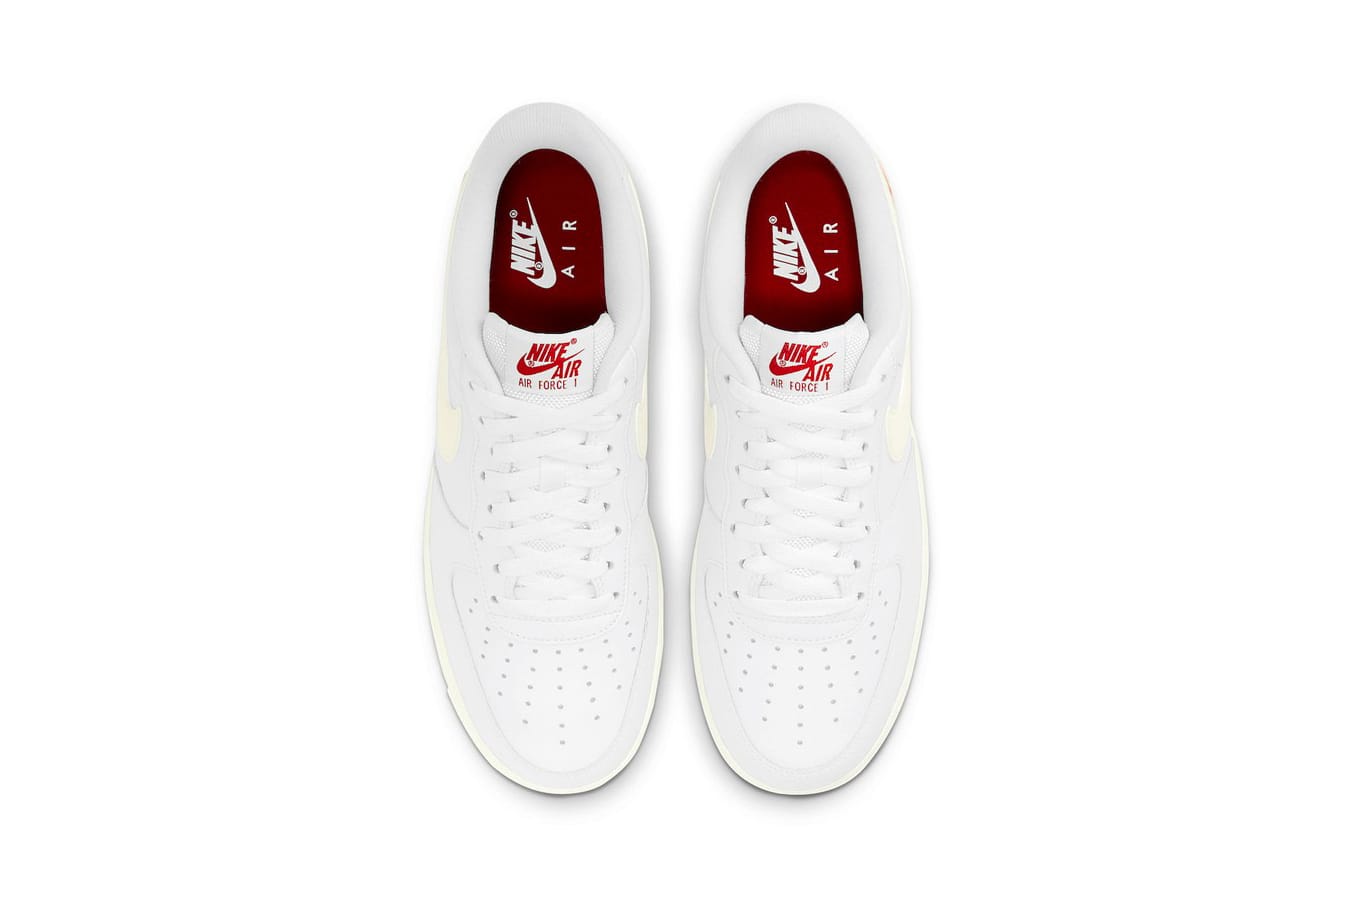 air forces with red heart